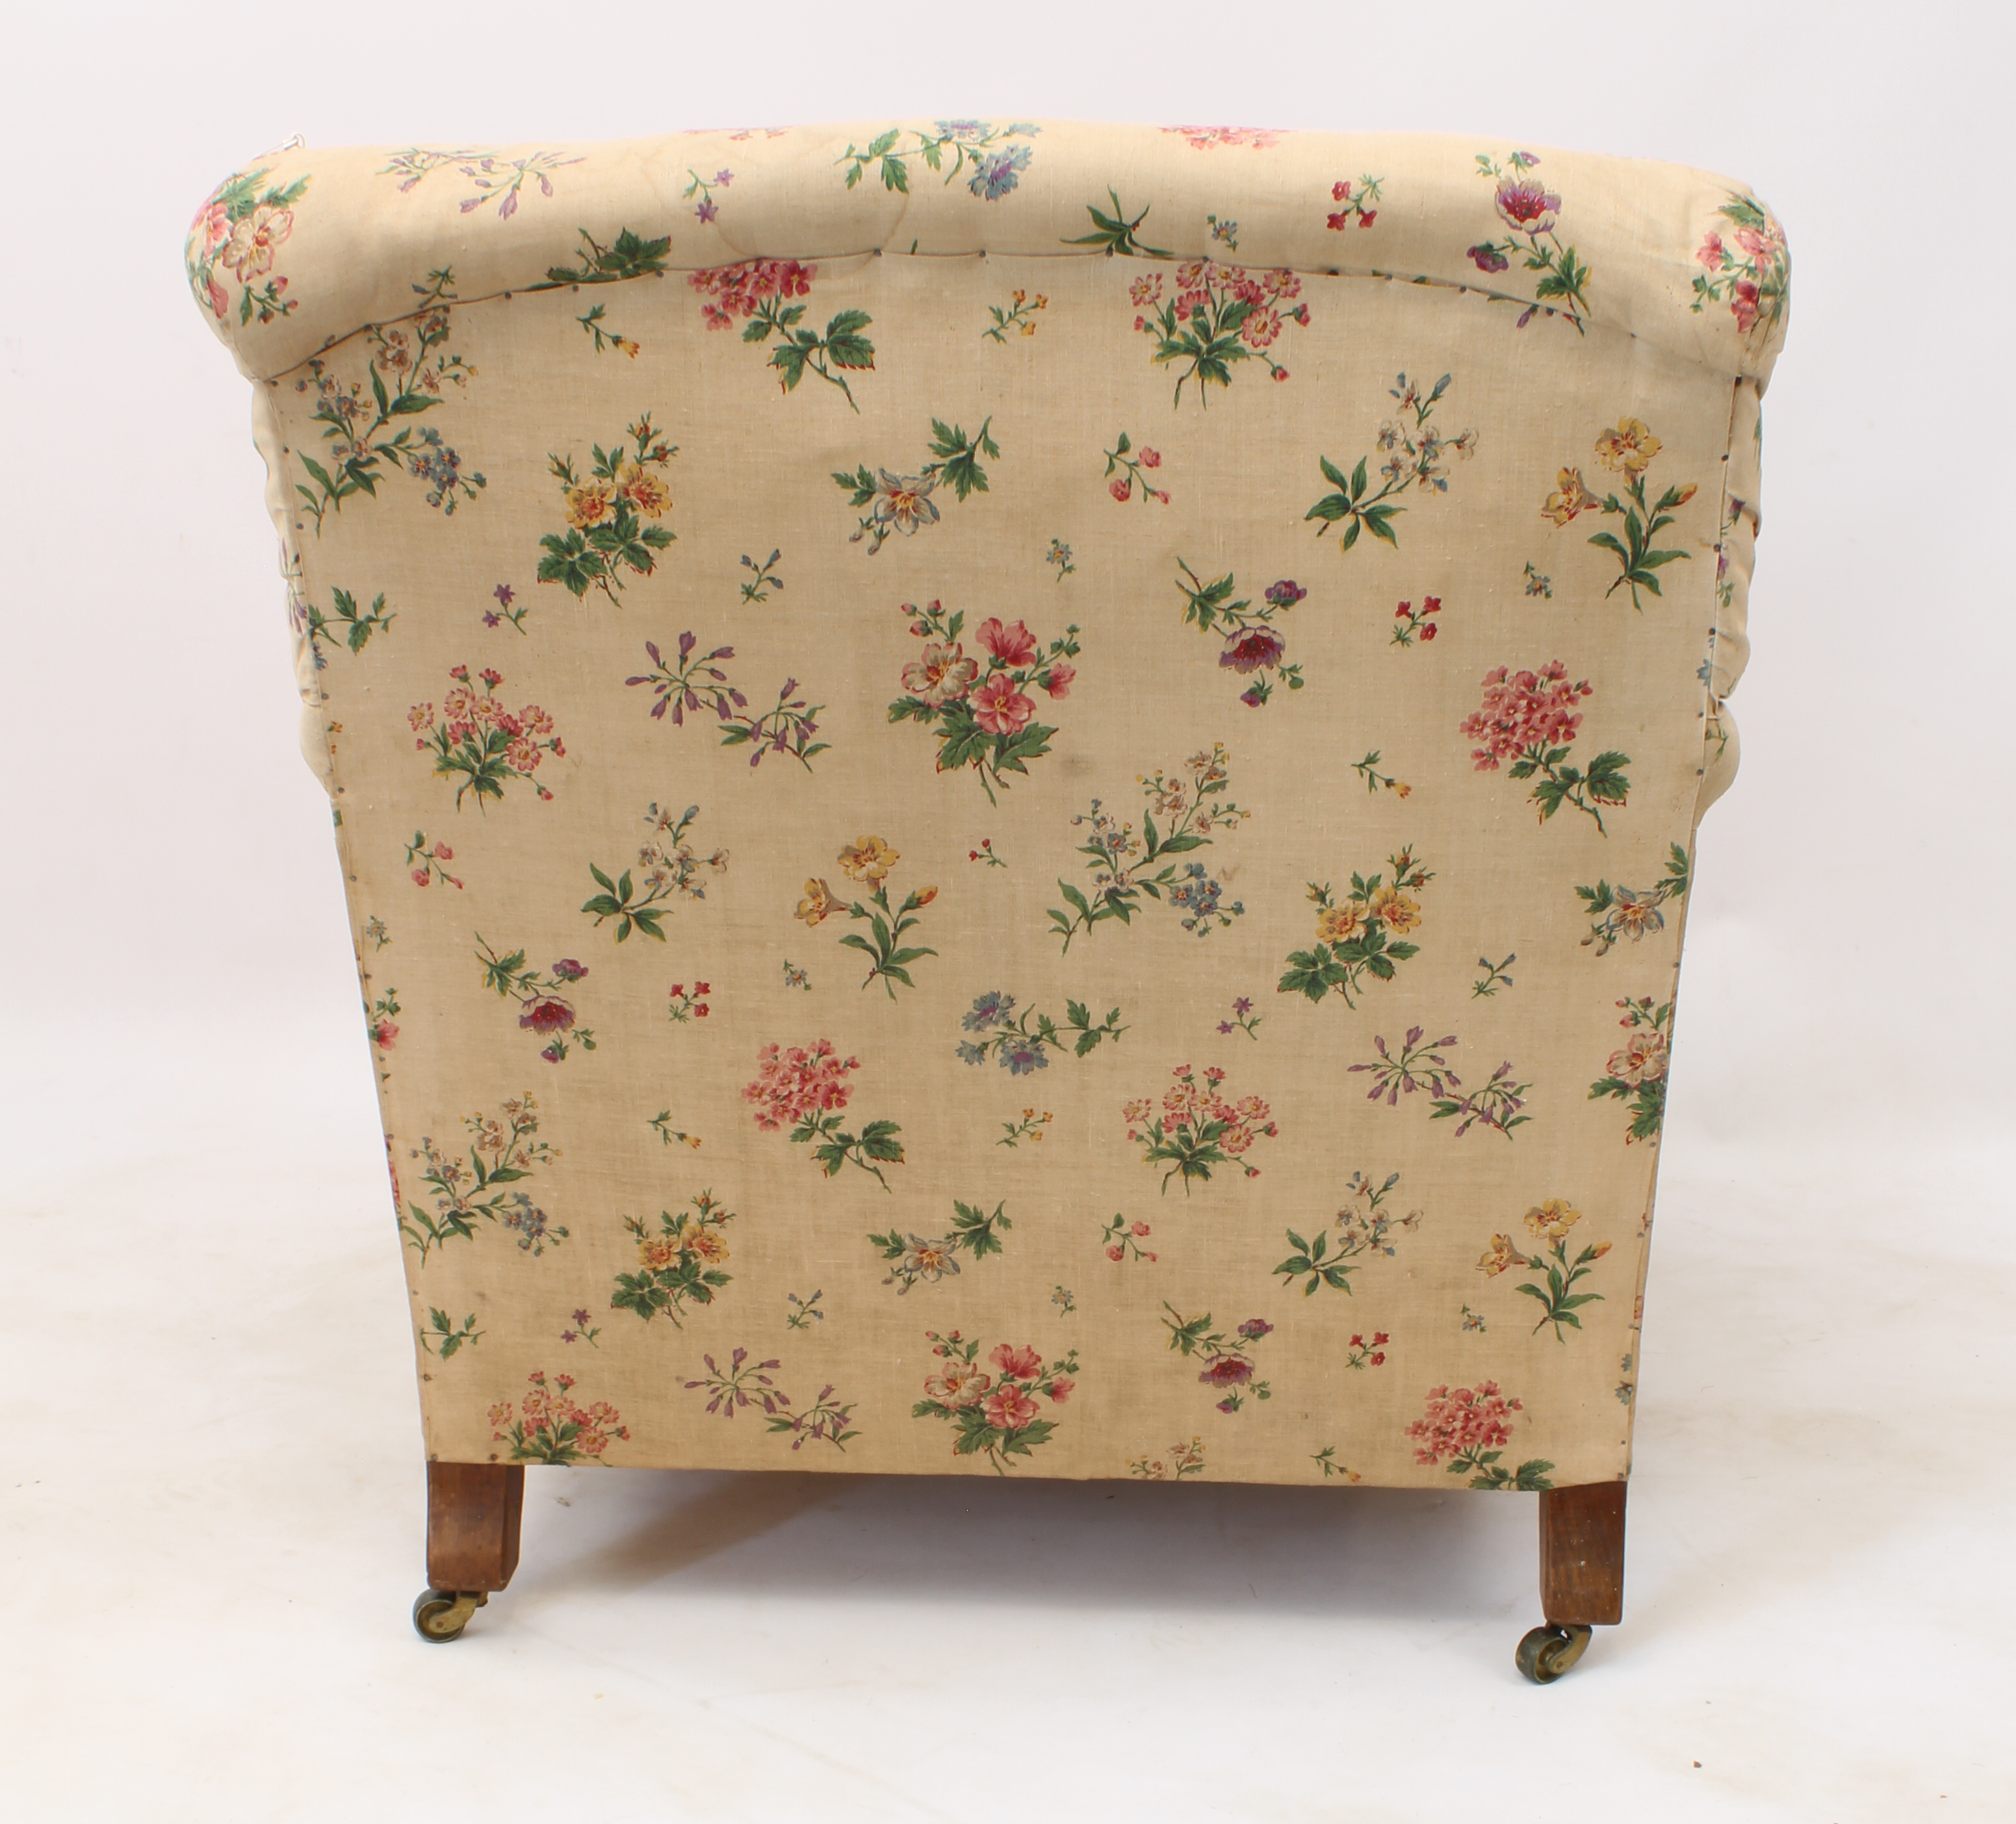 An early 20th century armchair by Howard & Sons - upholstered in early 20th century printed floral - Bild 5 aus 16